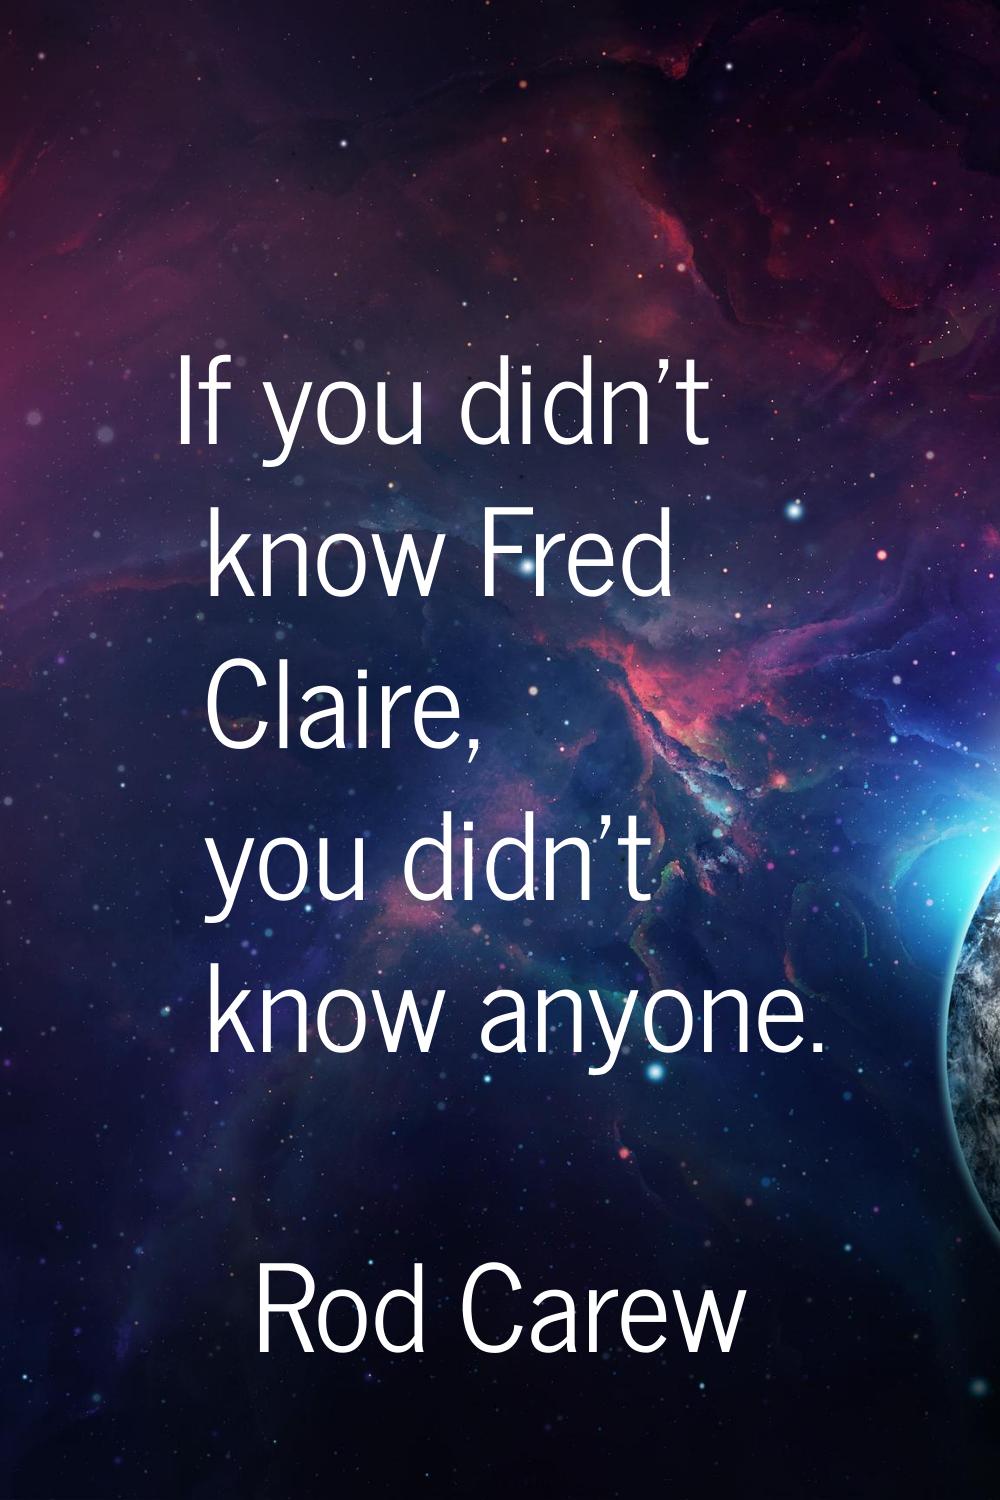 If you didn't know Fred Claire, you didn't know anyone.